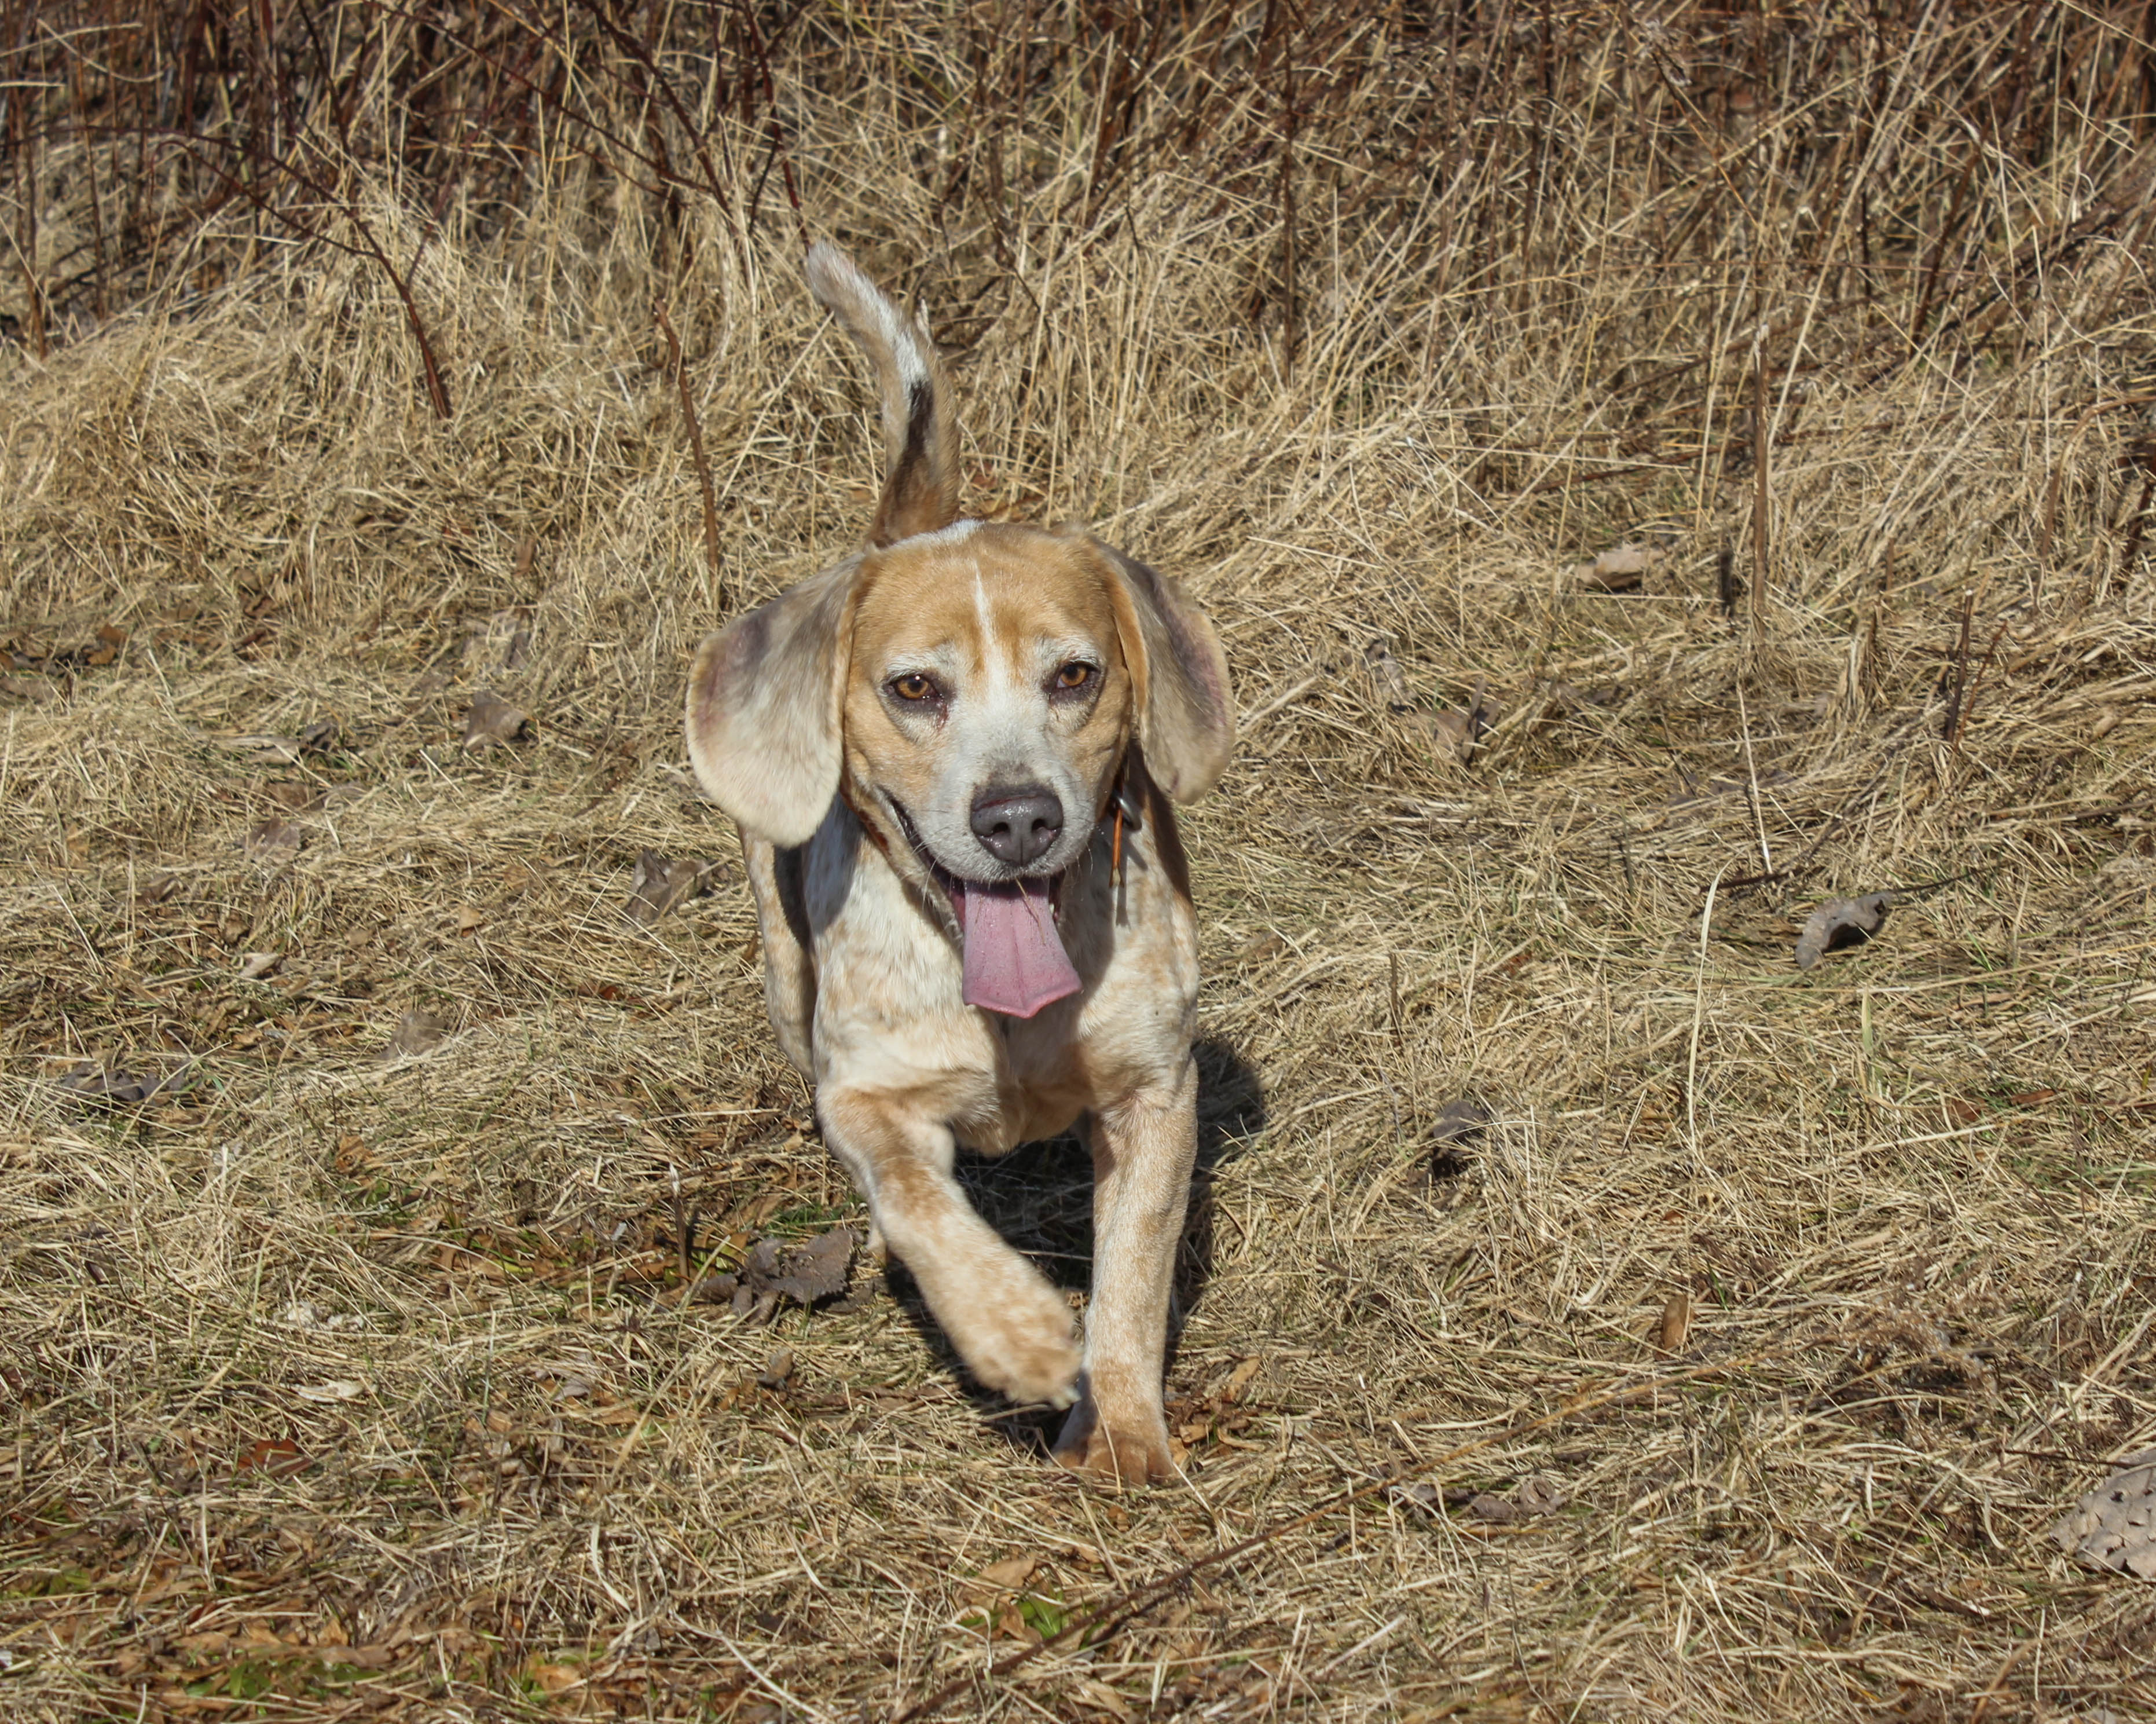 Rabbits and Beagles—An Old Hunt Made New